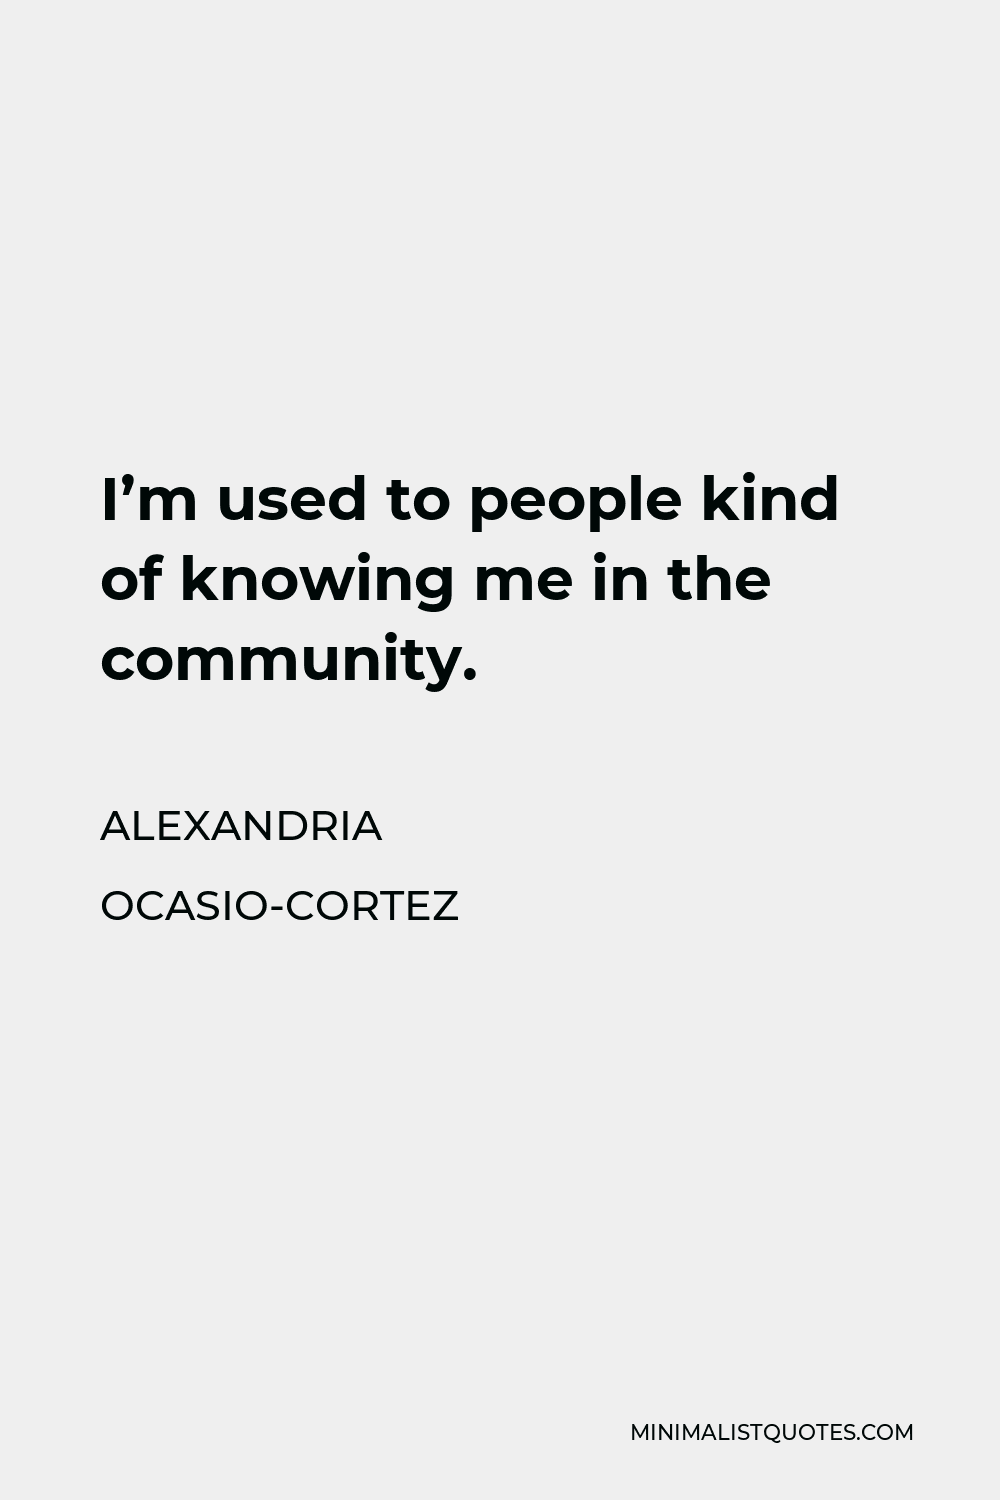 Alexandria Ocasio-Cortez Quote - I’m used to people kind of knowing me in the community.